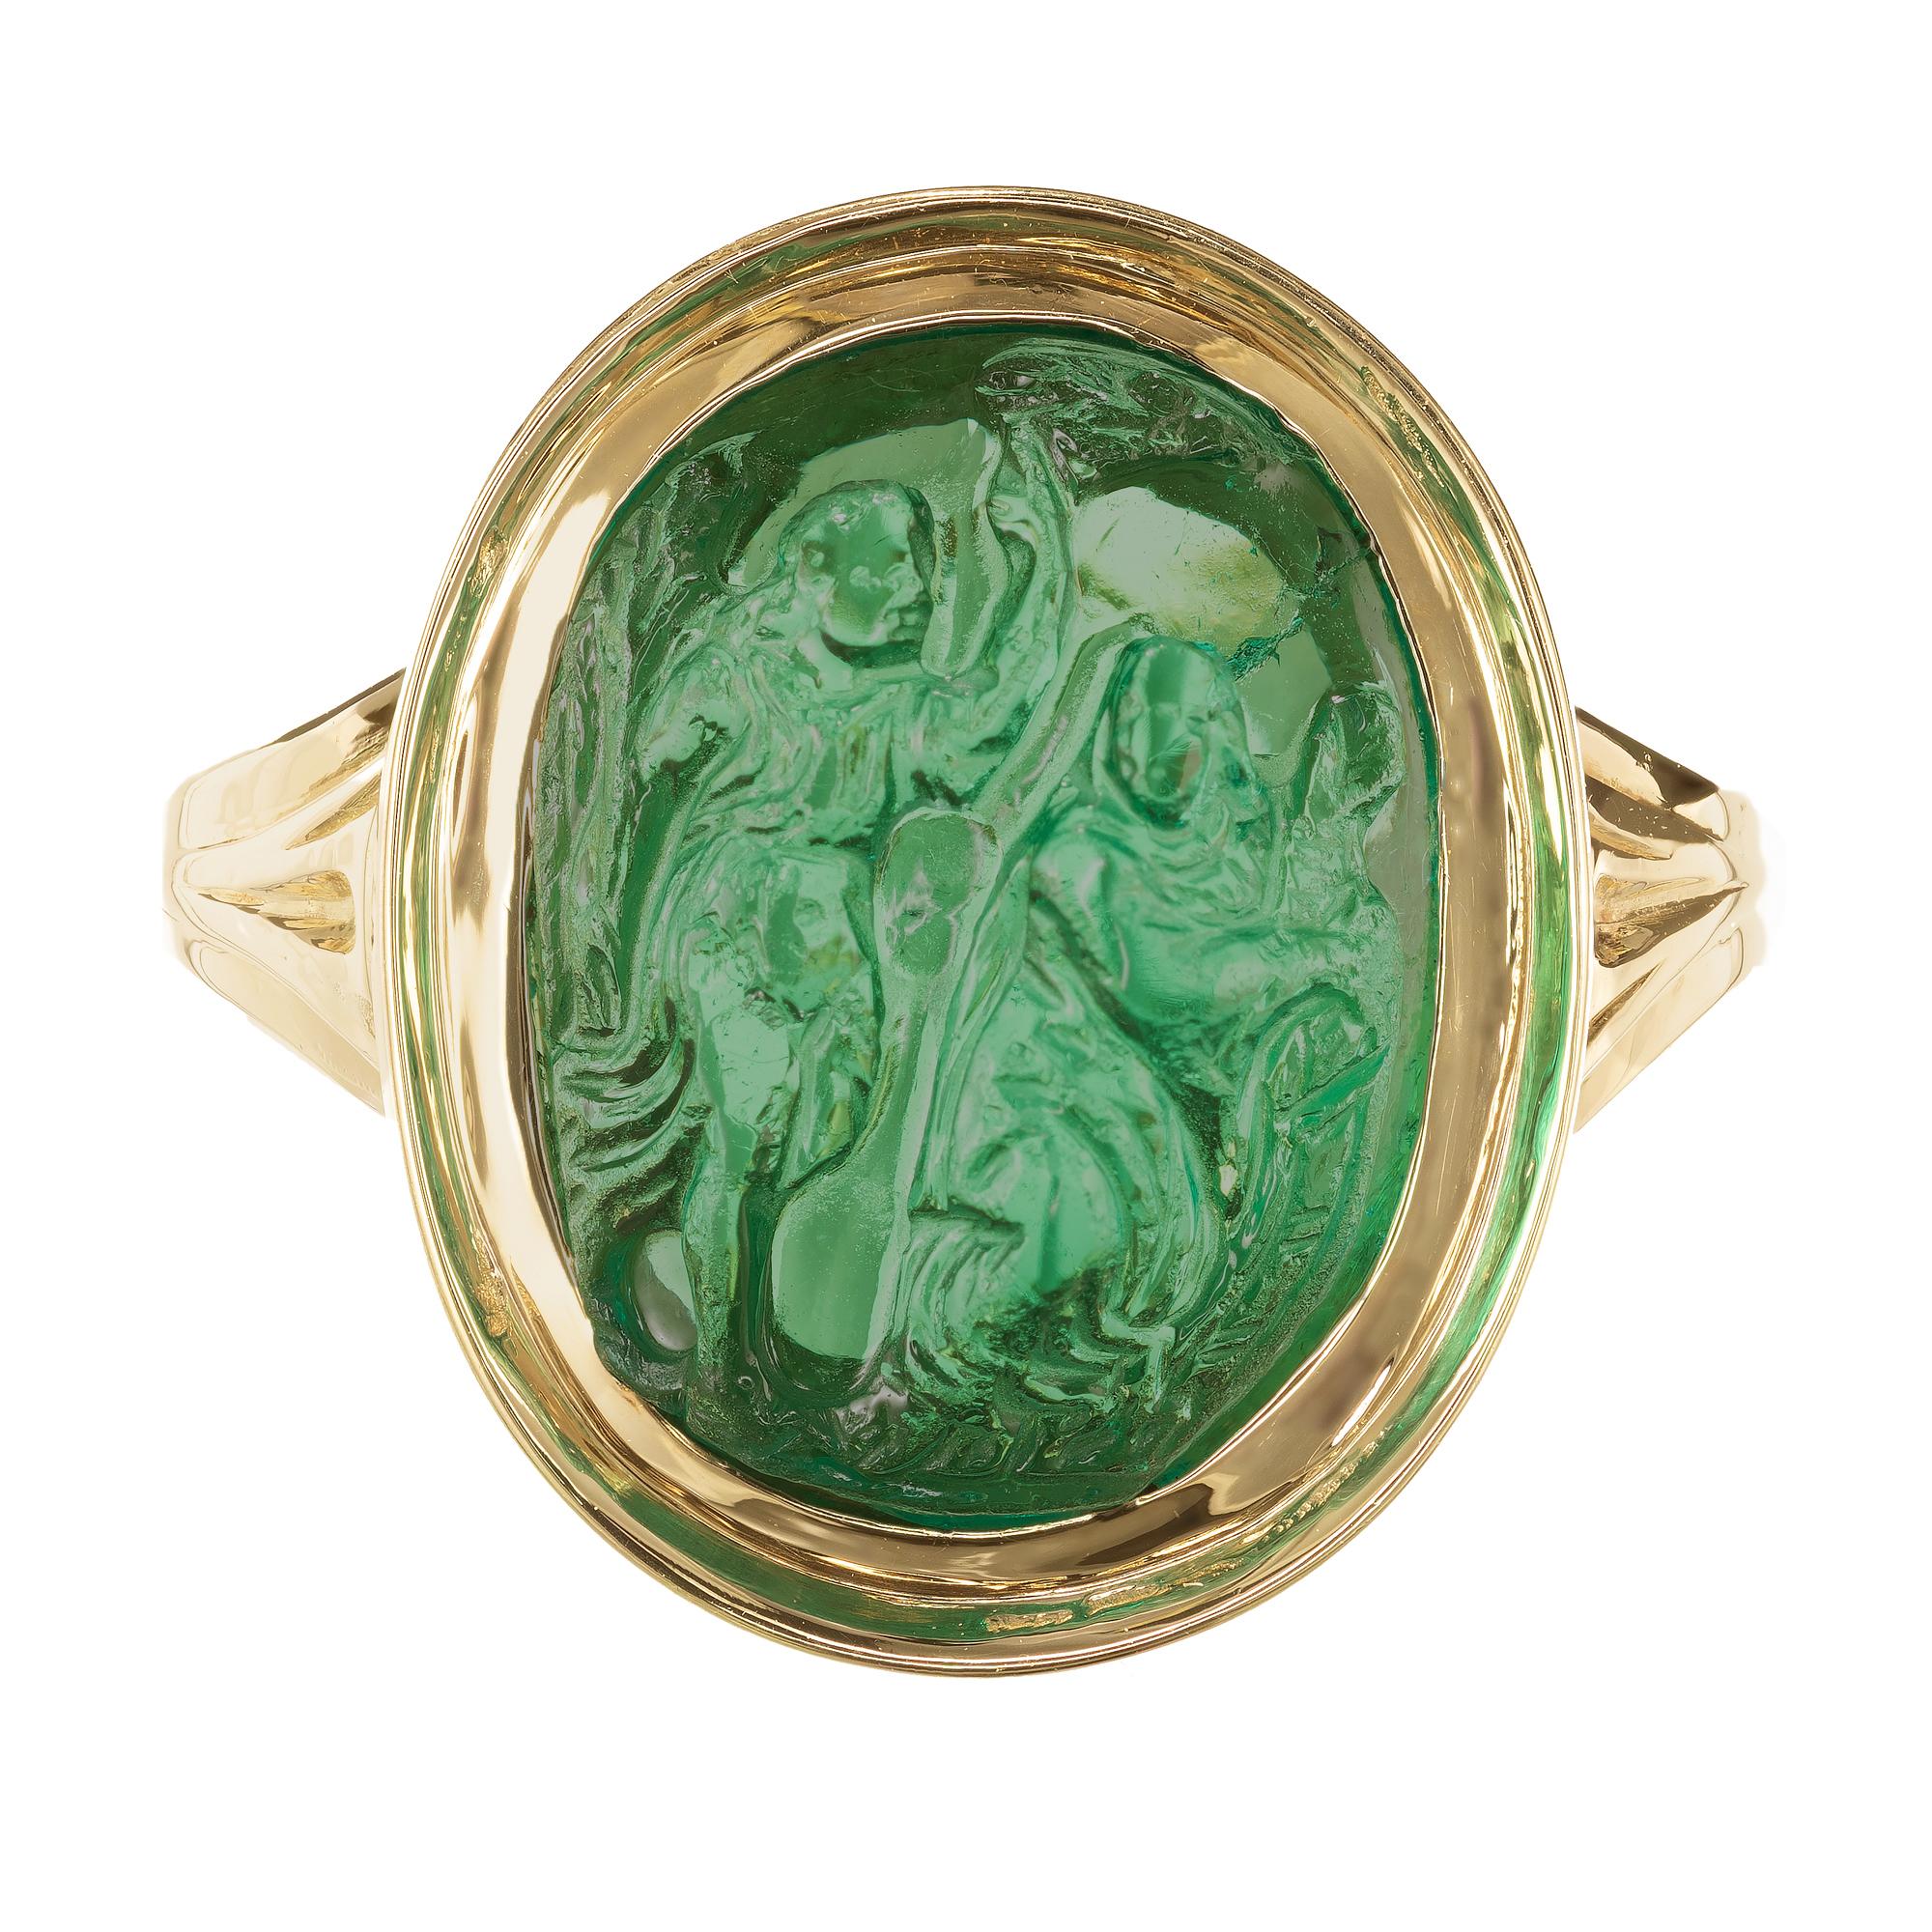 Late 19th century Untreated natural carved emerald ring. No oil, no heat and no enhancements. AGL certified Colombian natural color. Emerald carving of a male set in an 18k yellow gold setting.

Size 7 and sizable
Ring tested: 18k
3.5 to 4.5cts
AGL